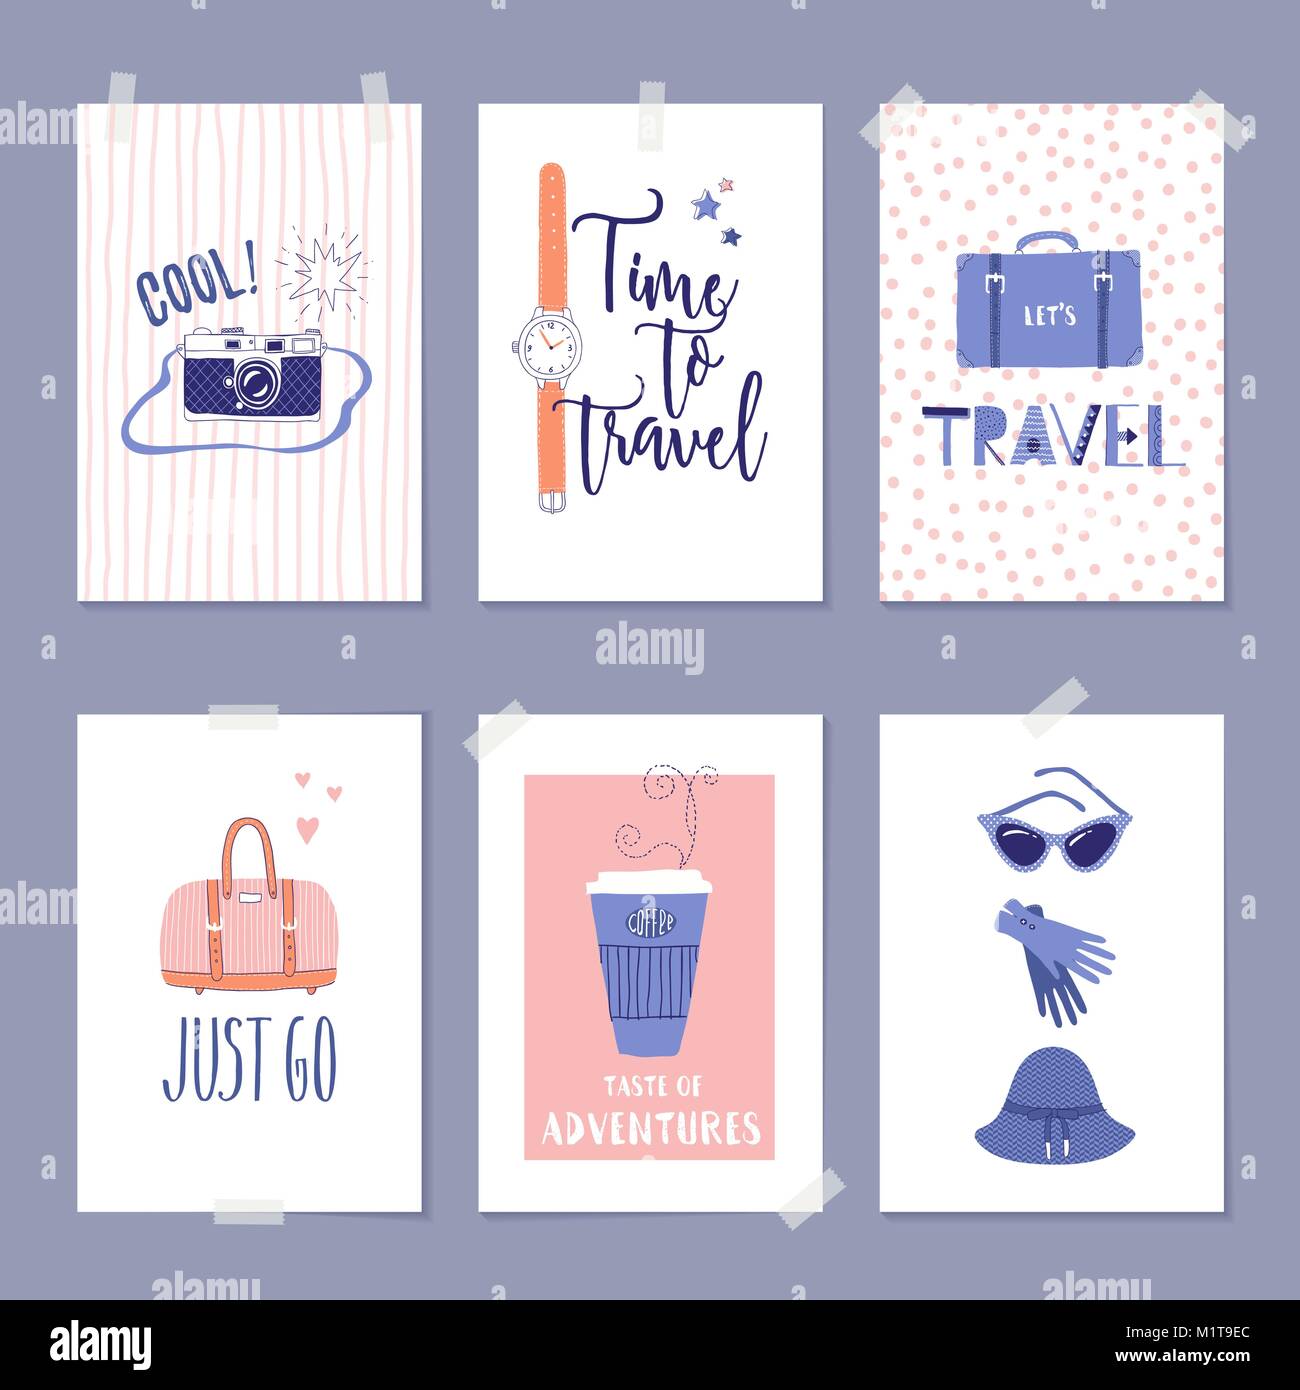 Vector set of templates with travel illustrations and lettering. For greeting card, poster, label or banner design. Retro 50's style. Stock Vector